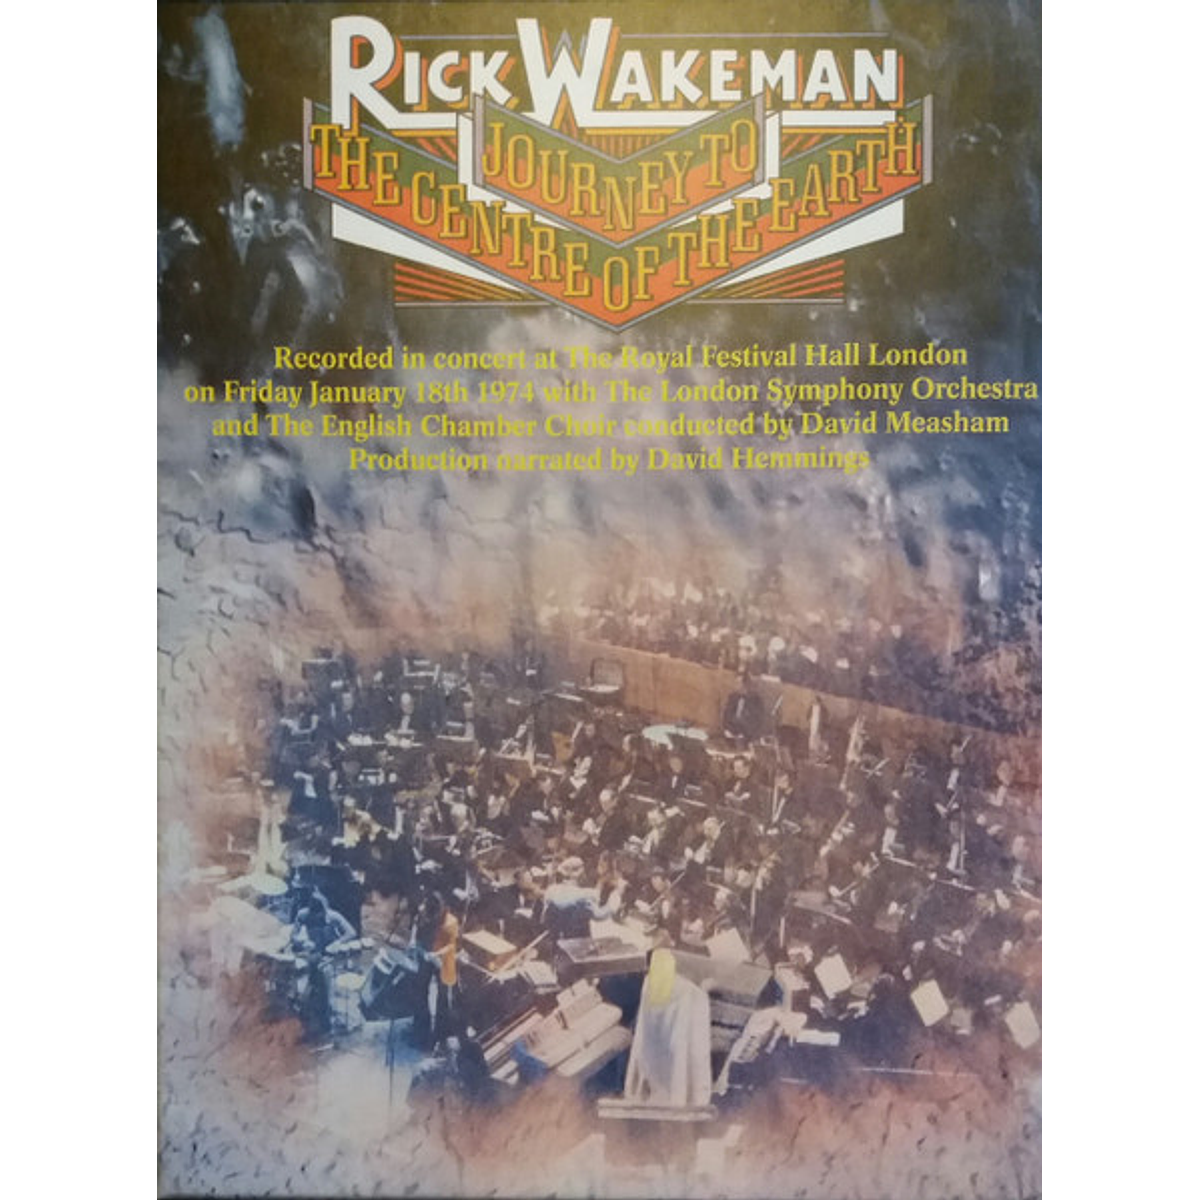 Rick Wakeman – Journey To The Centre Of The Earth - 3 Cds +